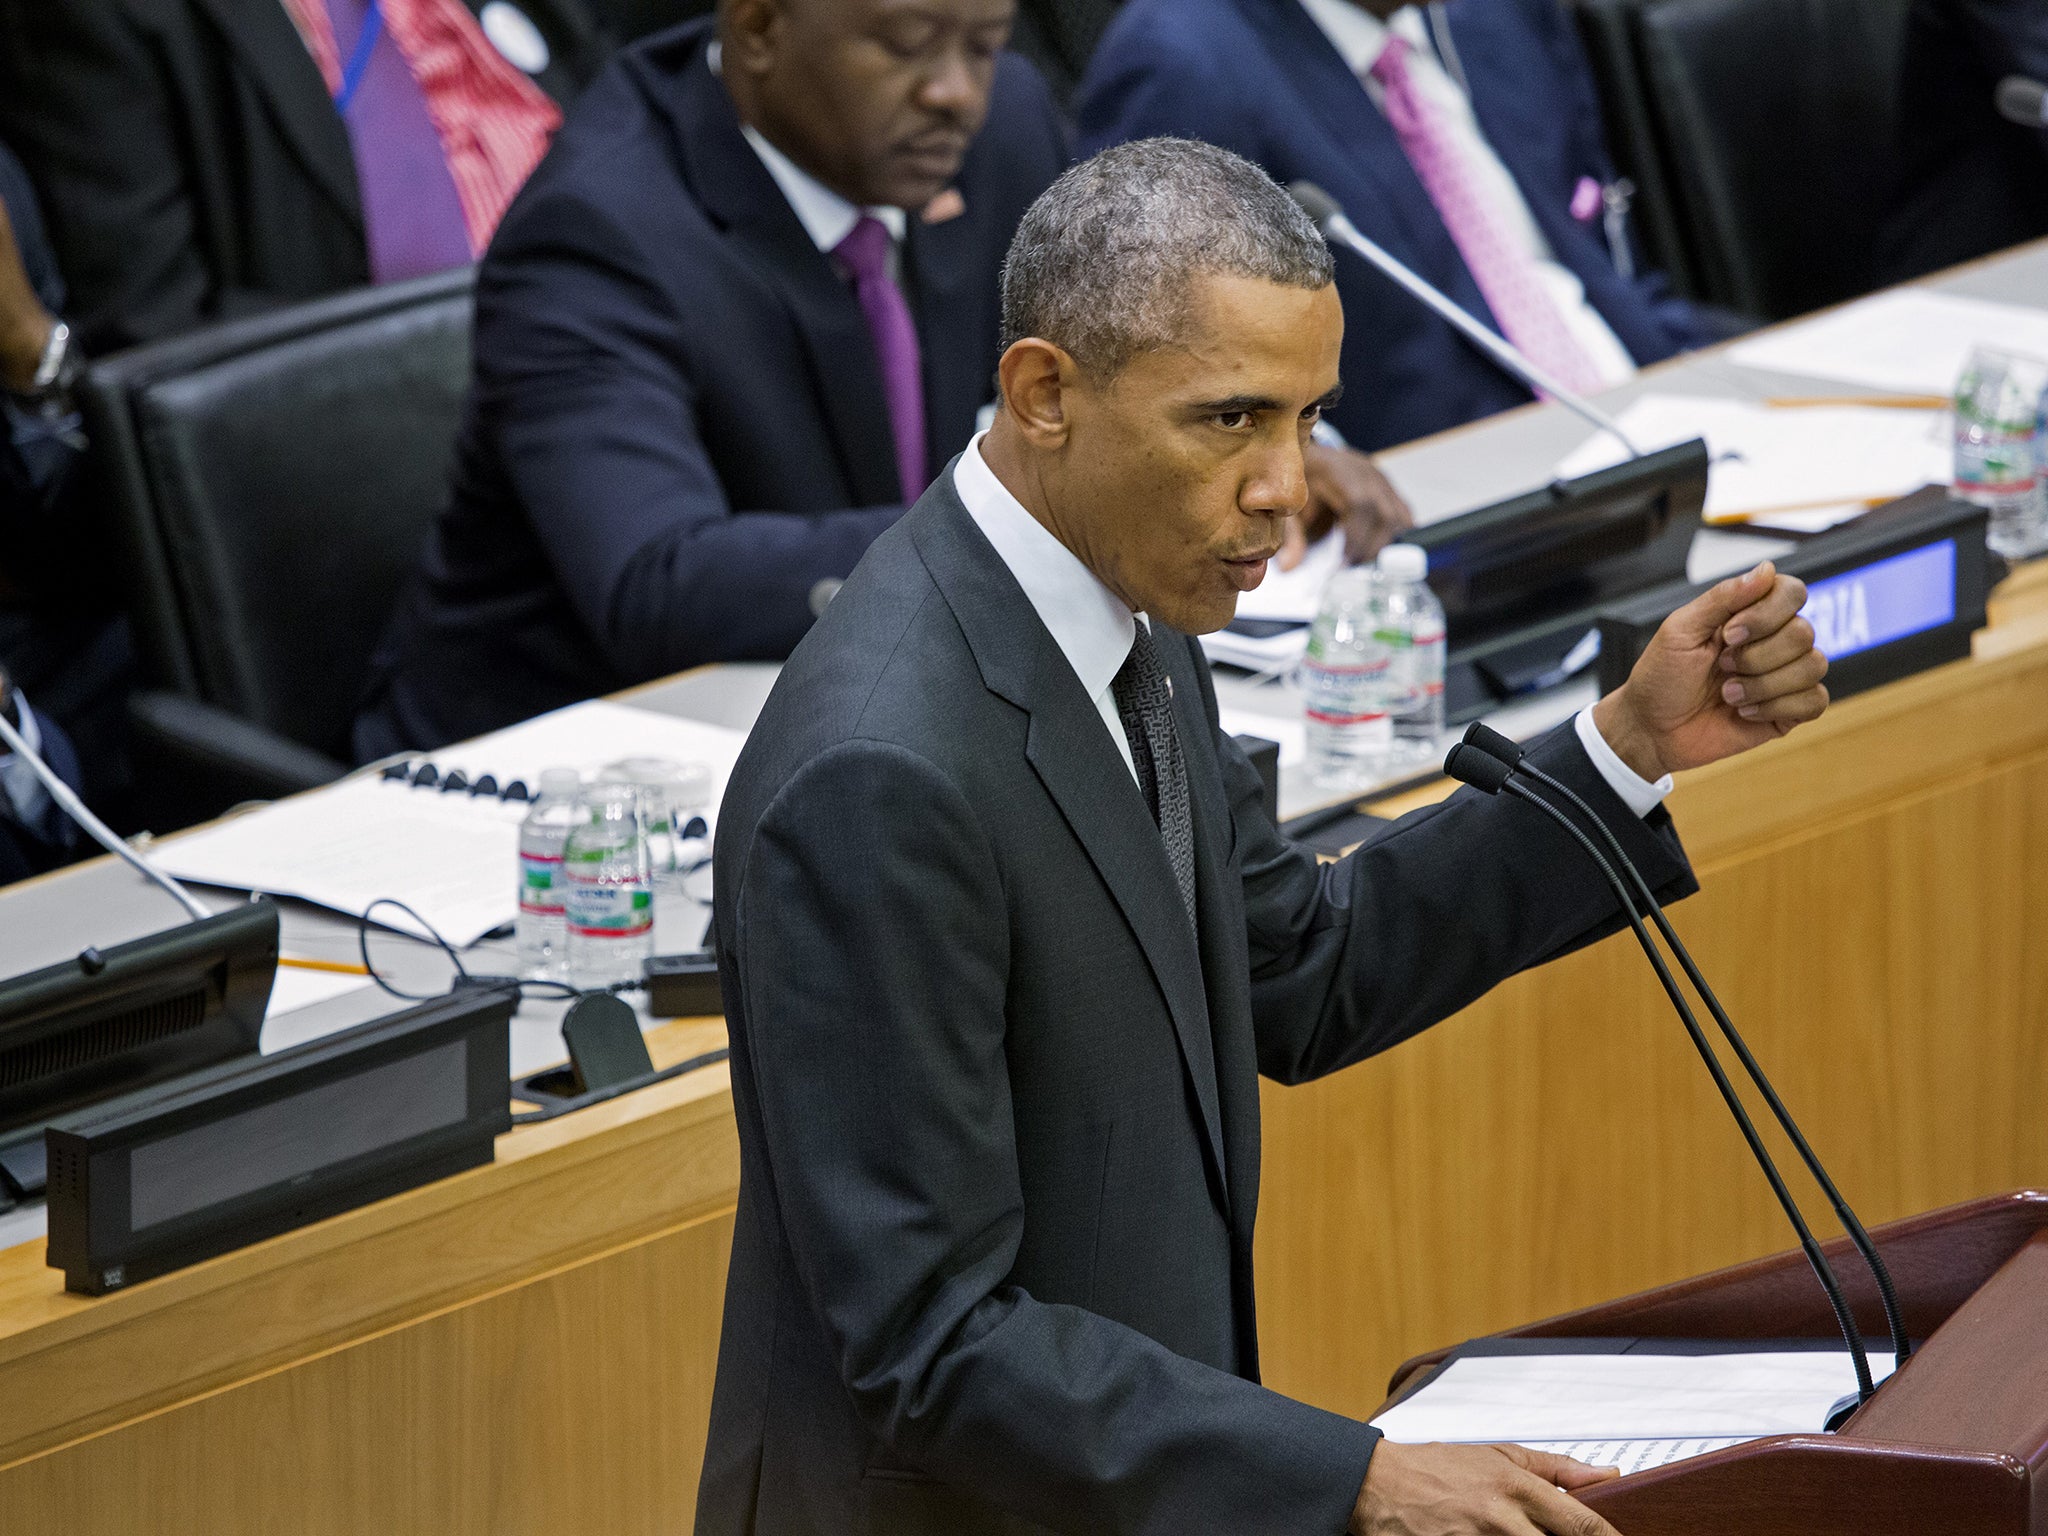 Barack Obama has told delegates at the United Nations that the response to the Ebola outbreak is still lacking